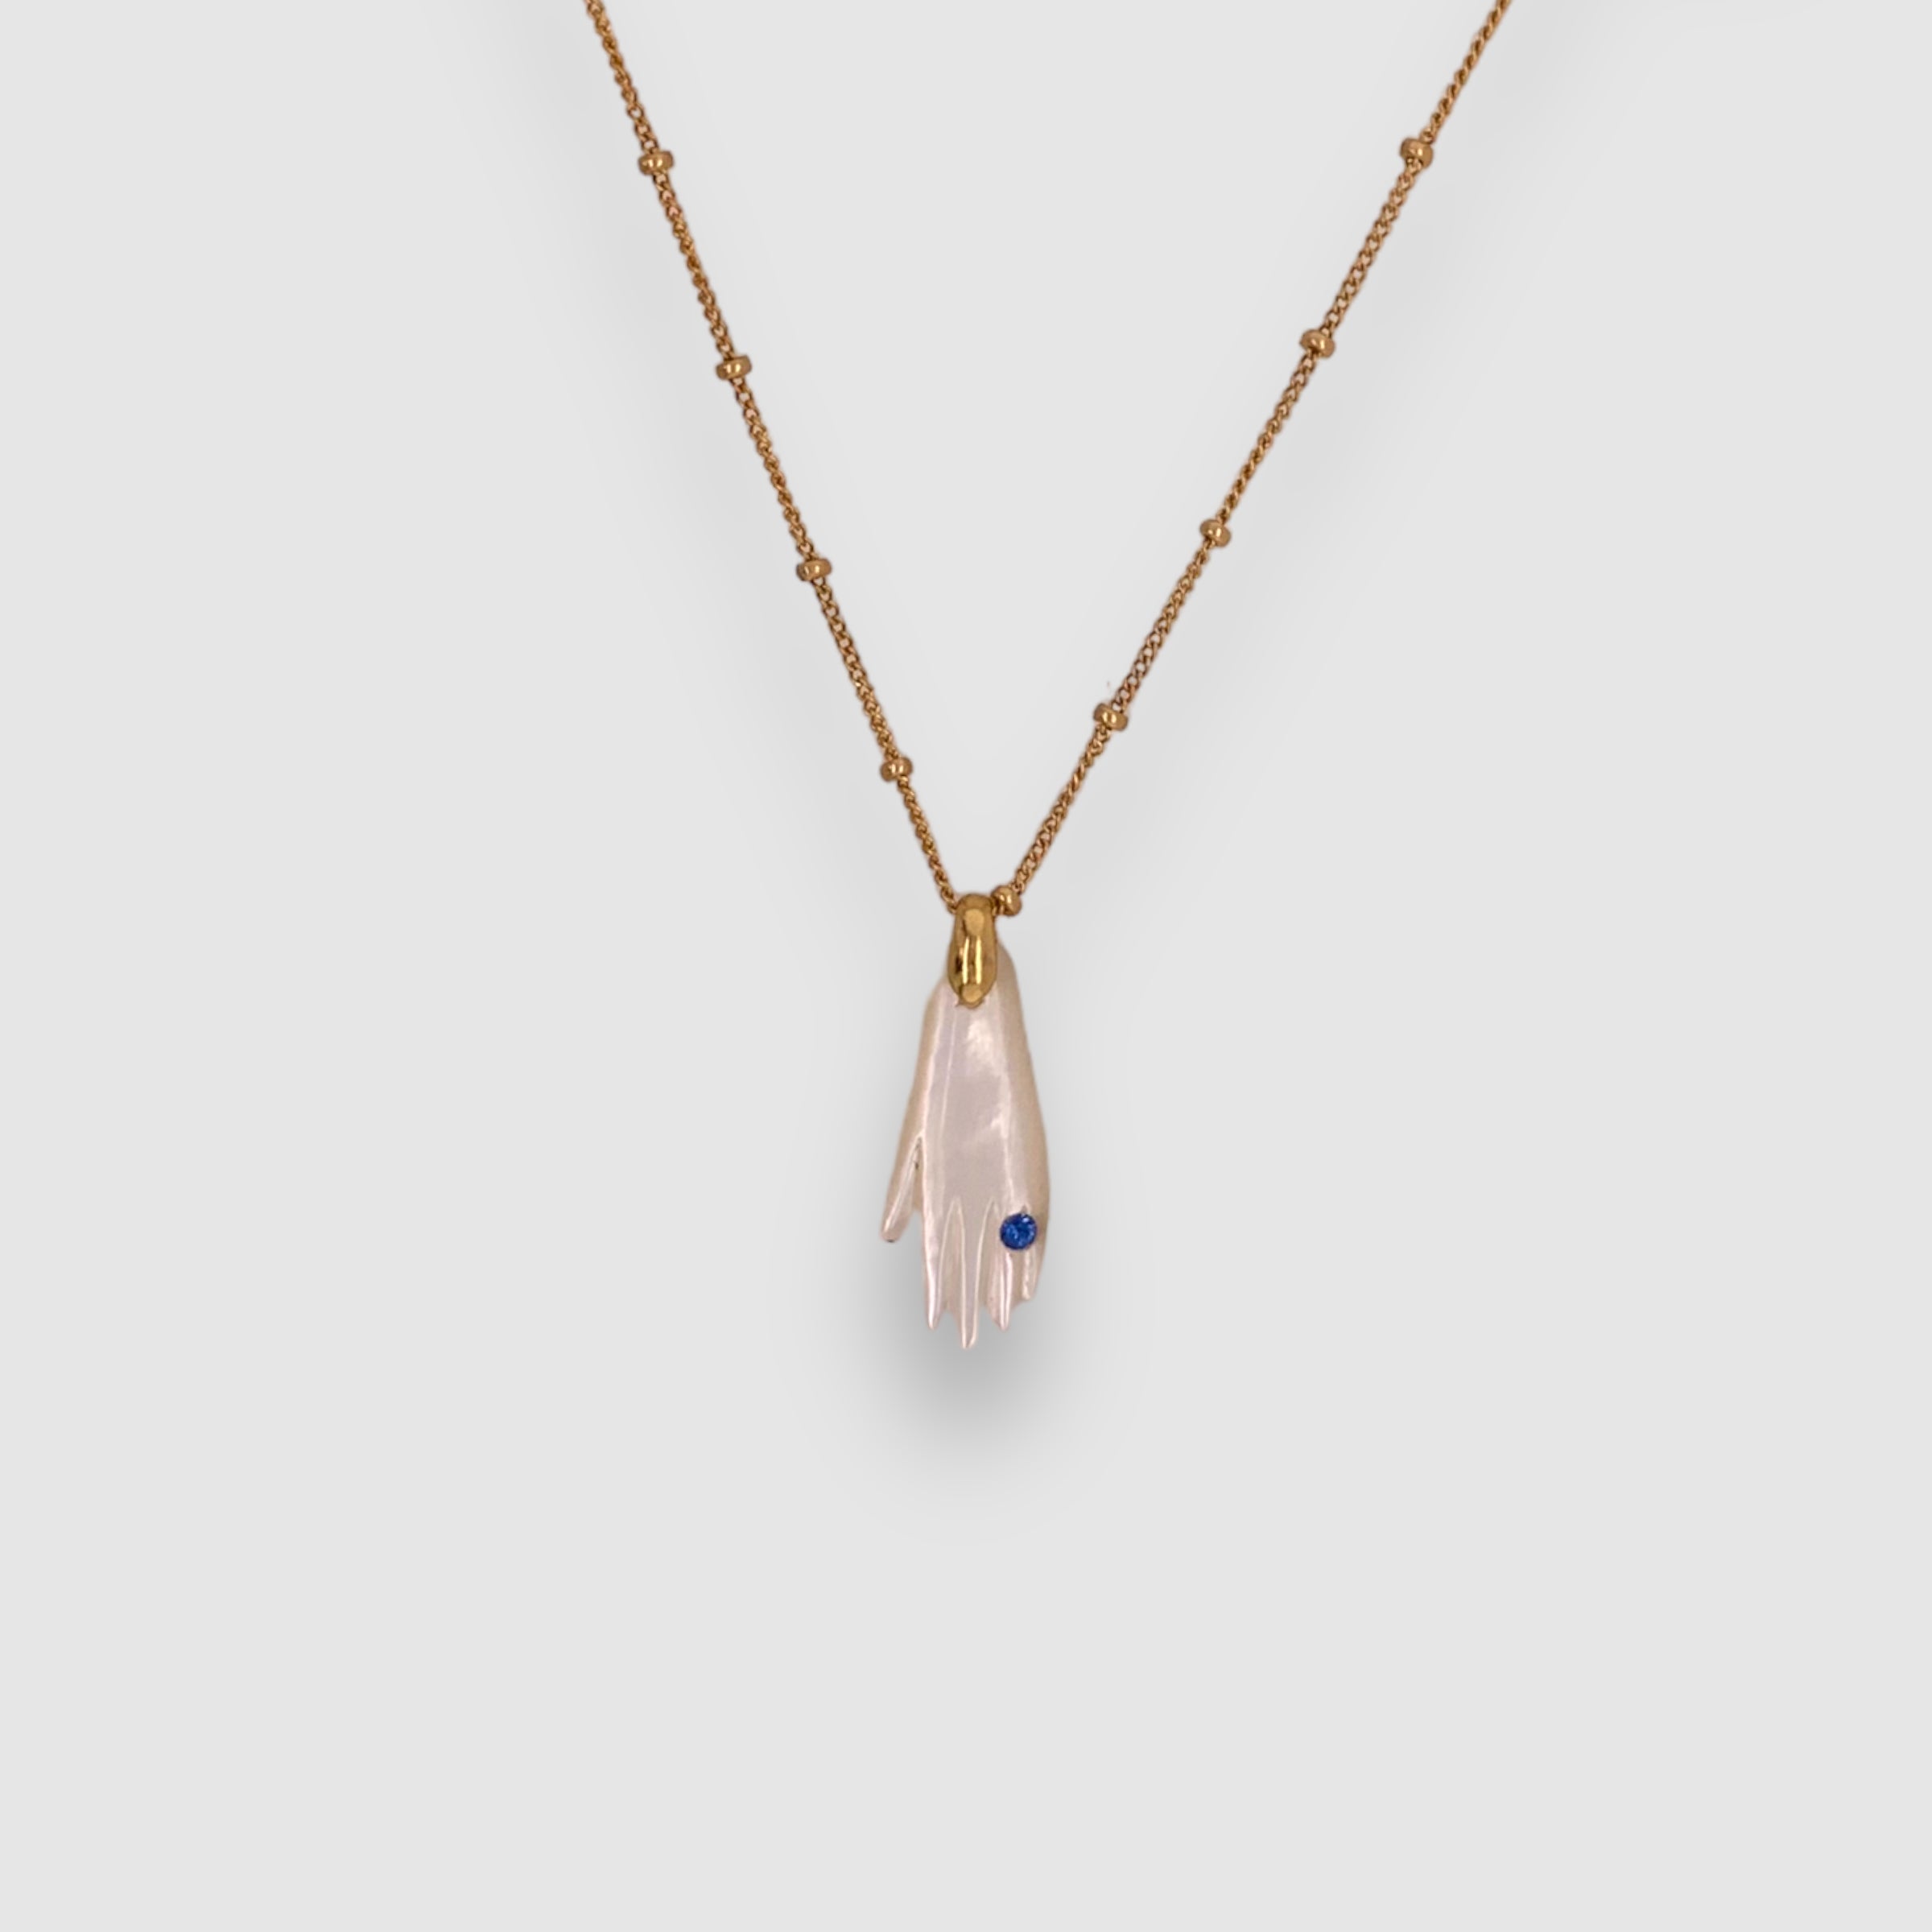 POESIA DEL MAR // NECKLACE // MOTHER OF PEARL // HAND // BLUE